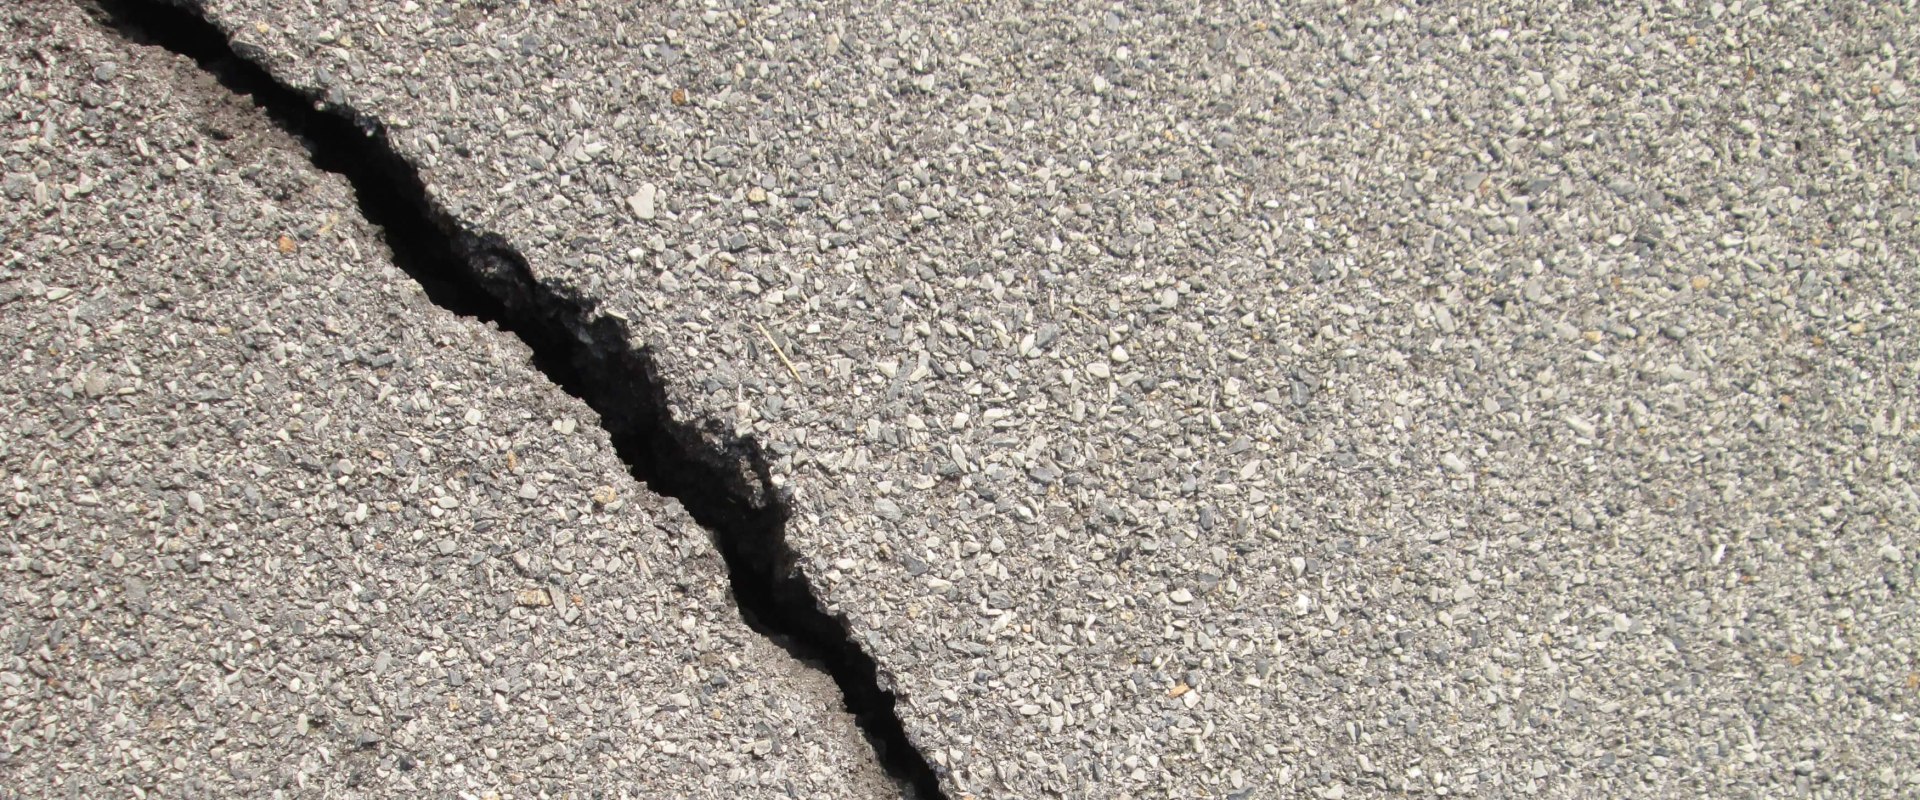 When is the Right Time to Repair Cracks in the Concrete Roadway?